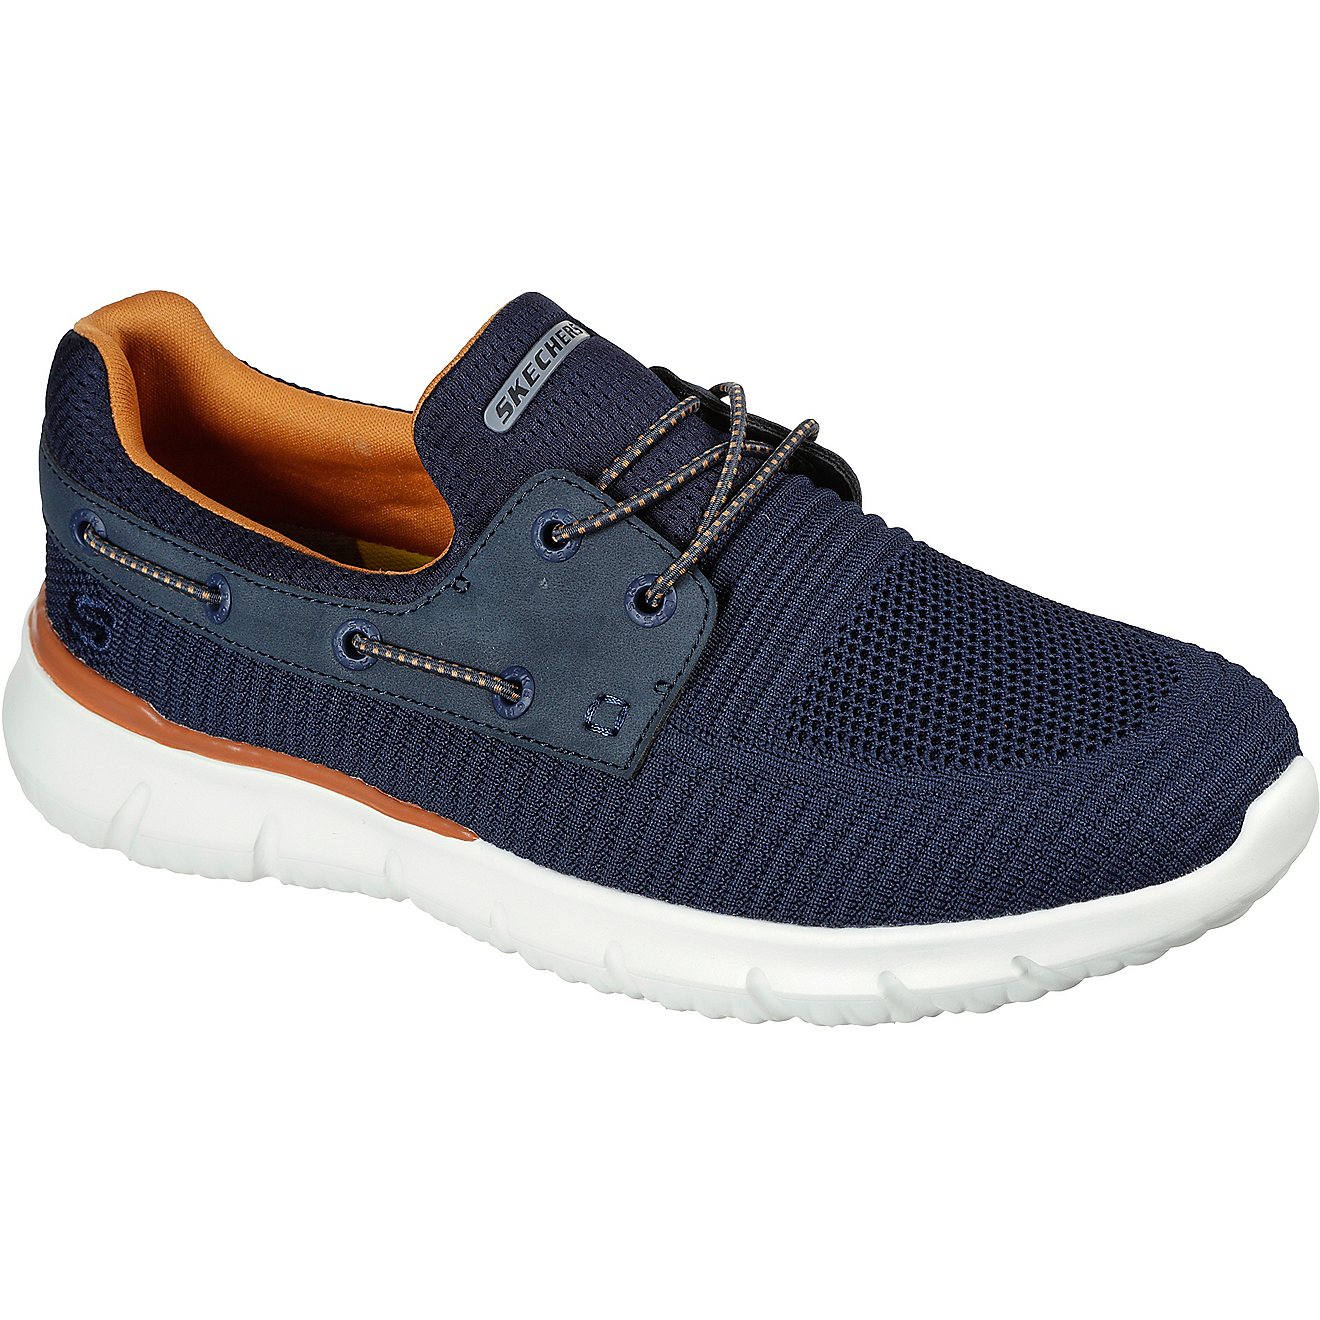 Skechers Men's Del Retto Slip On Shoes | Free Shipping at Academy